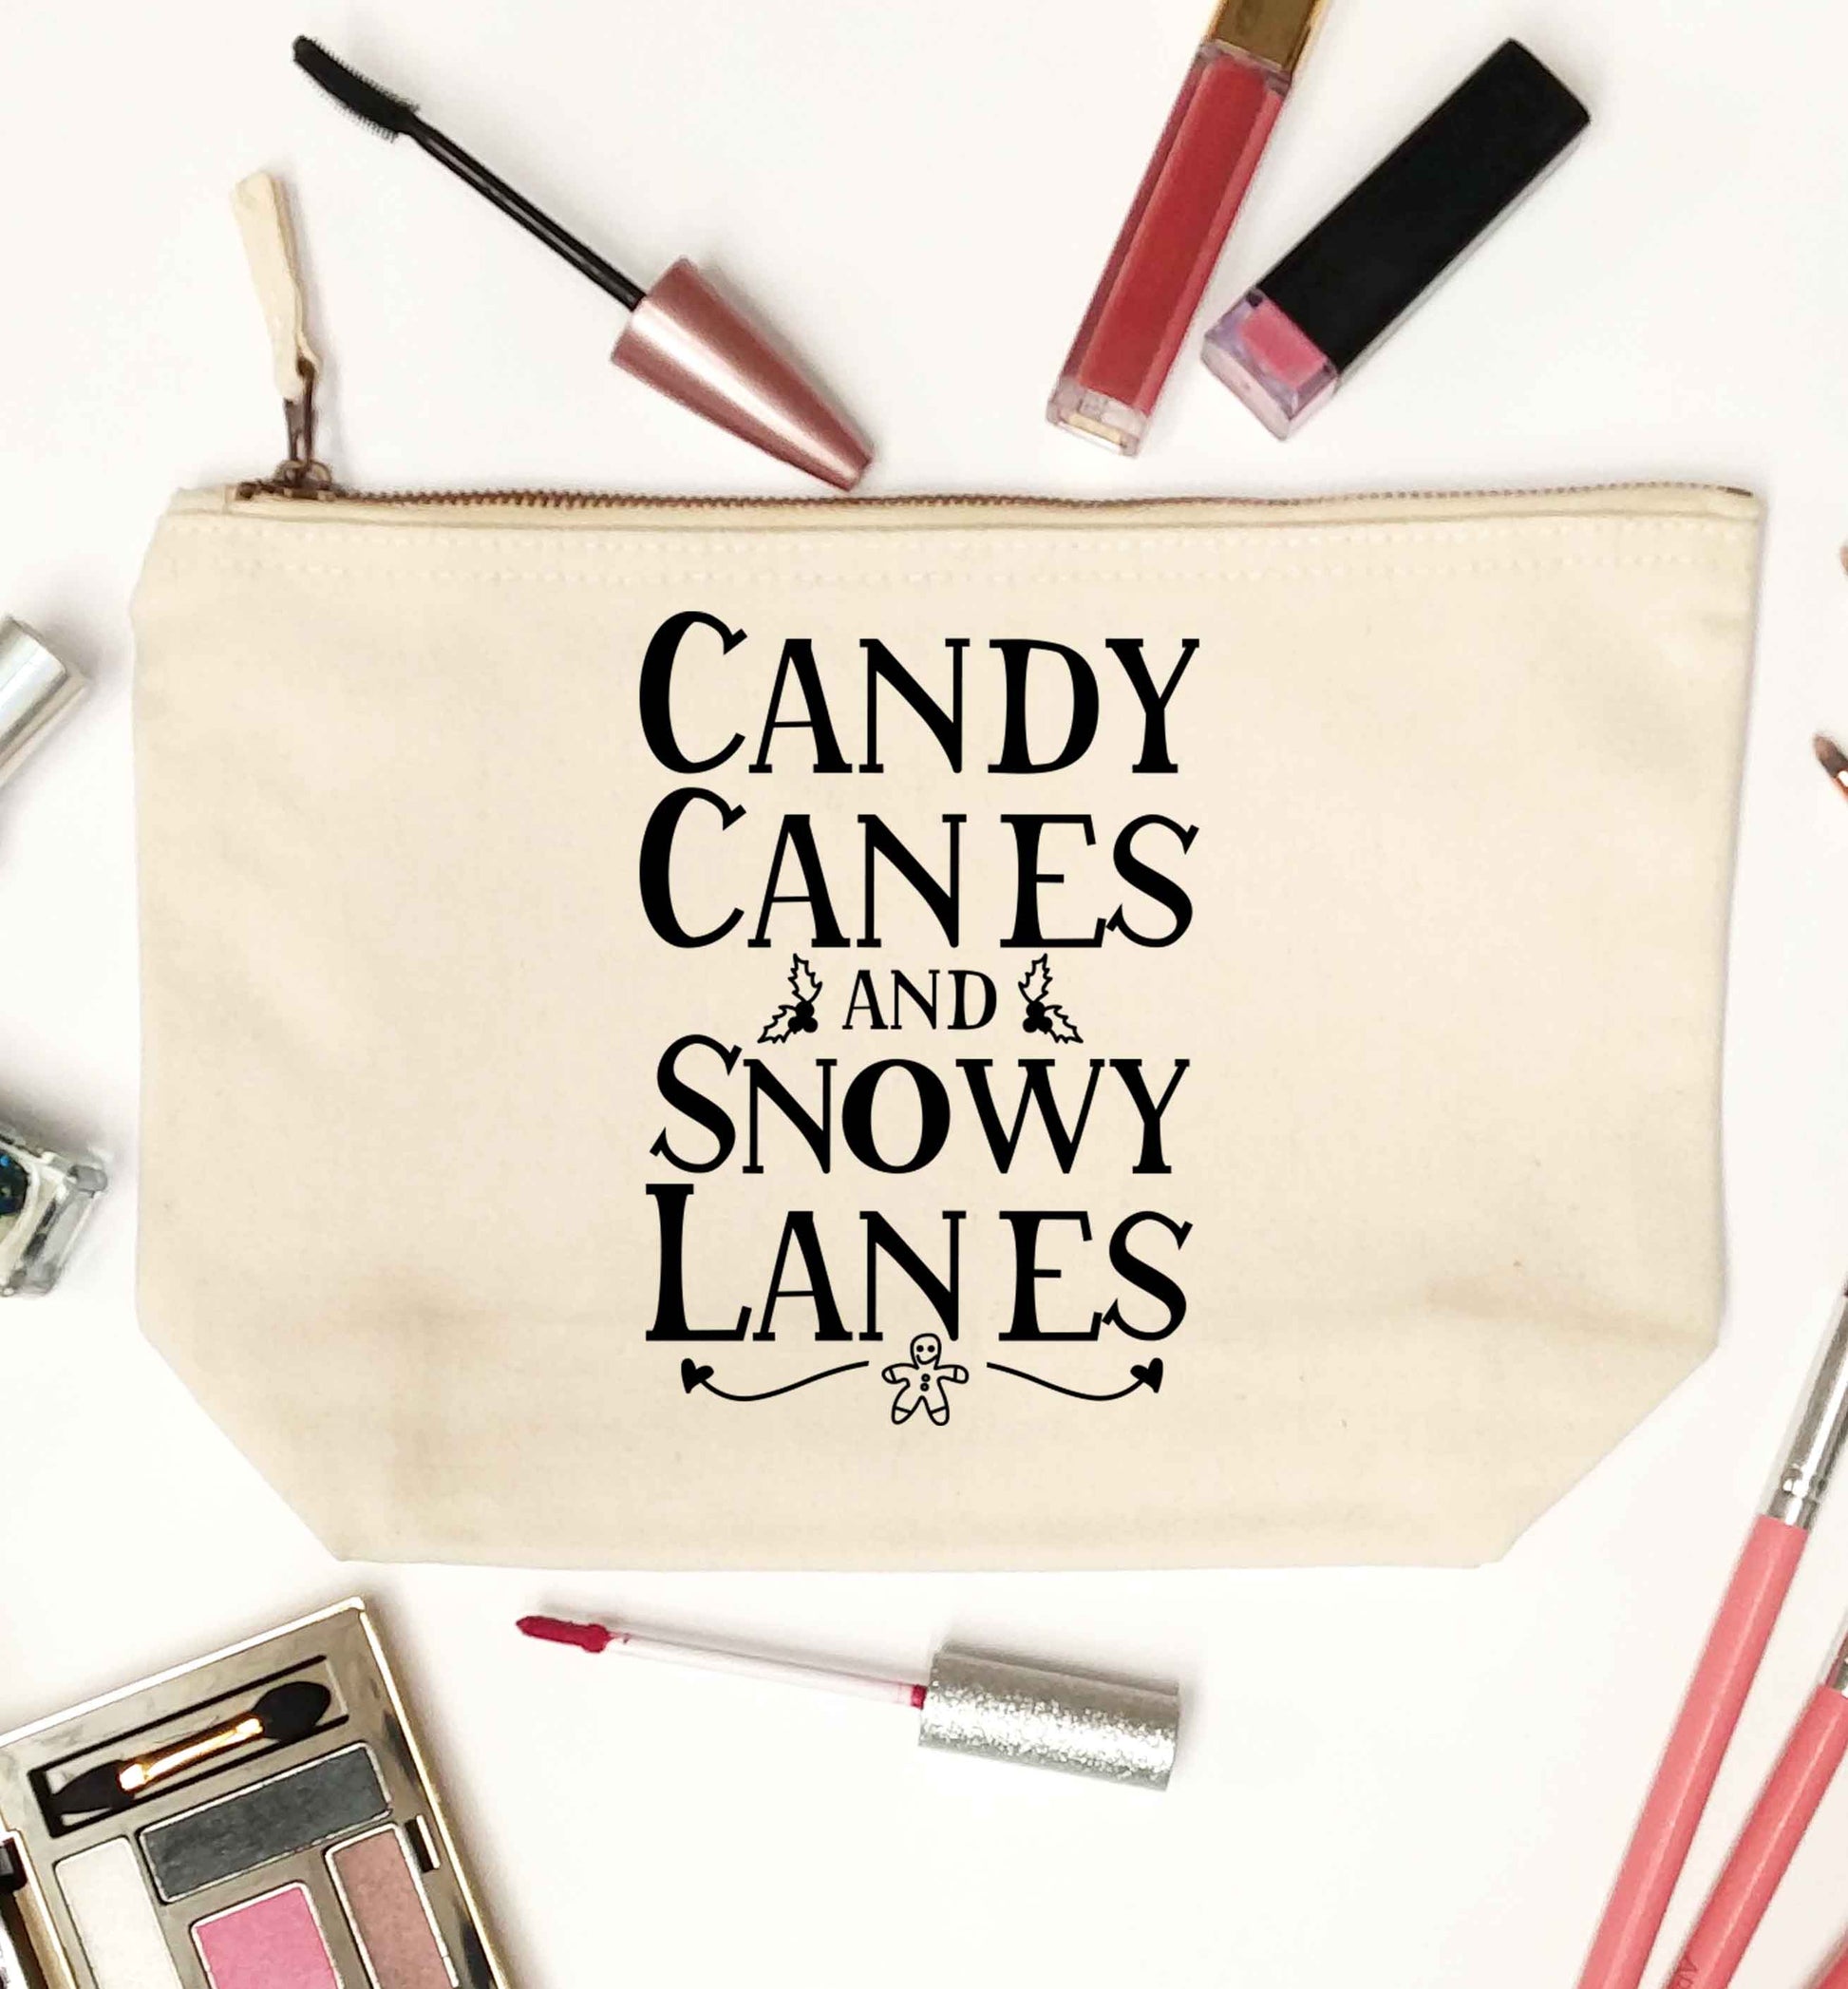 Candy canes and snowy lanes natural makeup bag